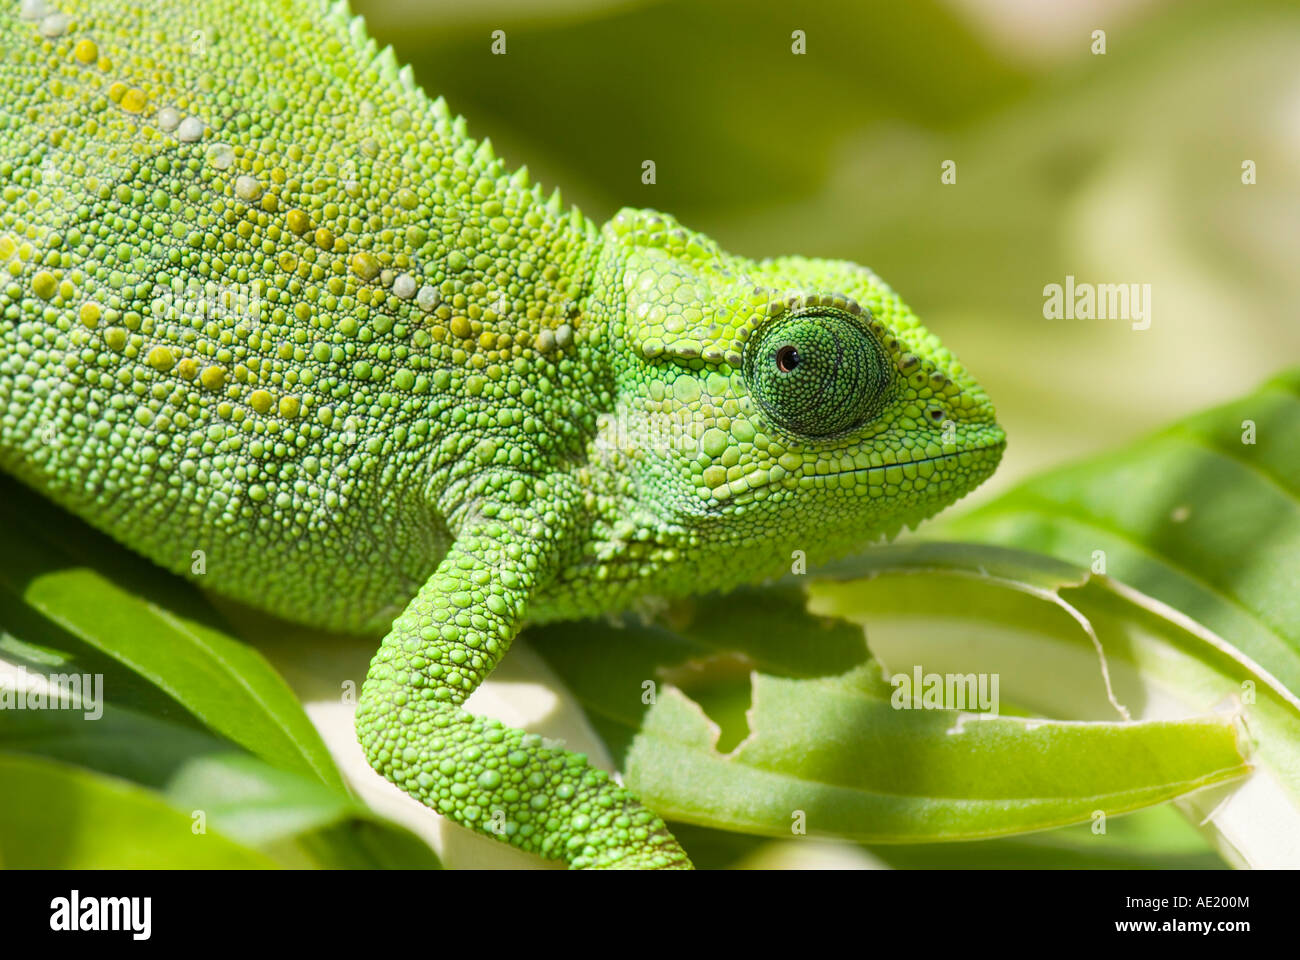 Green chameleon looking behind Stock Photo